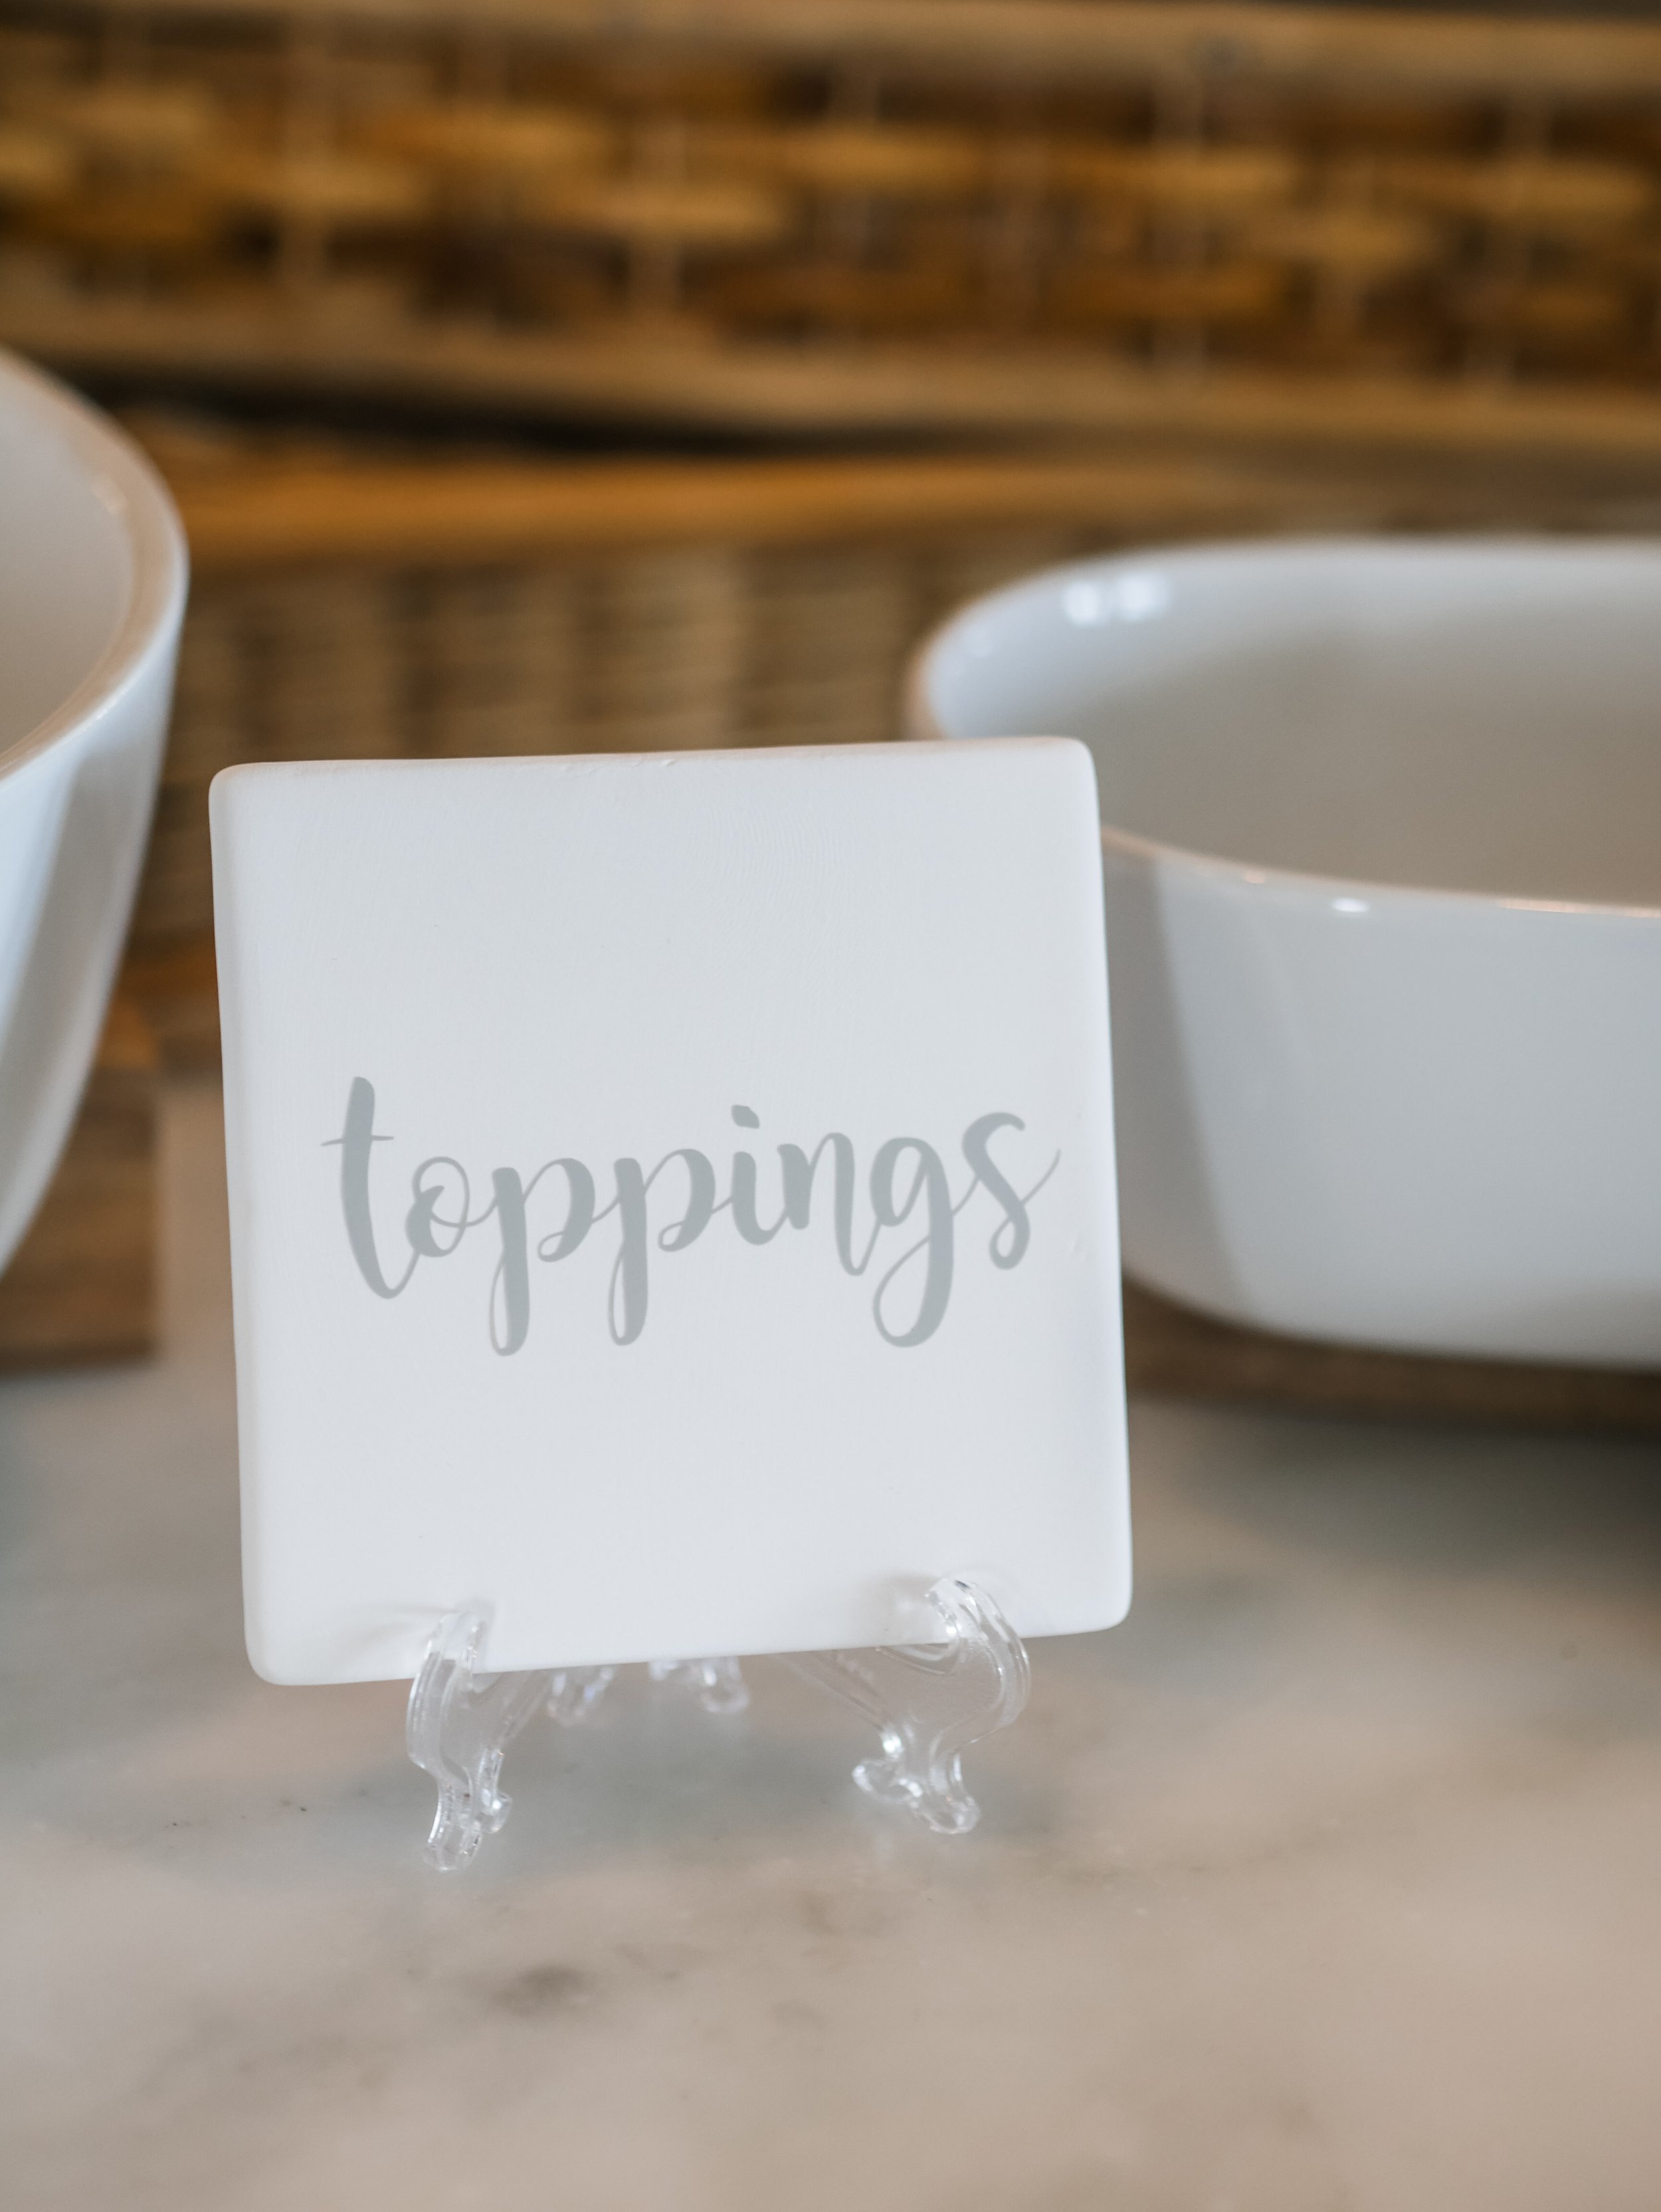  Elegant food labels using tiles - Host a stylish and relaxed Tulum beach-inspired Baby Shower with these ideas for food bar, drink station, picnic style seating, decor and more from event designer Carolina of MINT Event Design in Austin, Texas. Get 